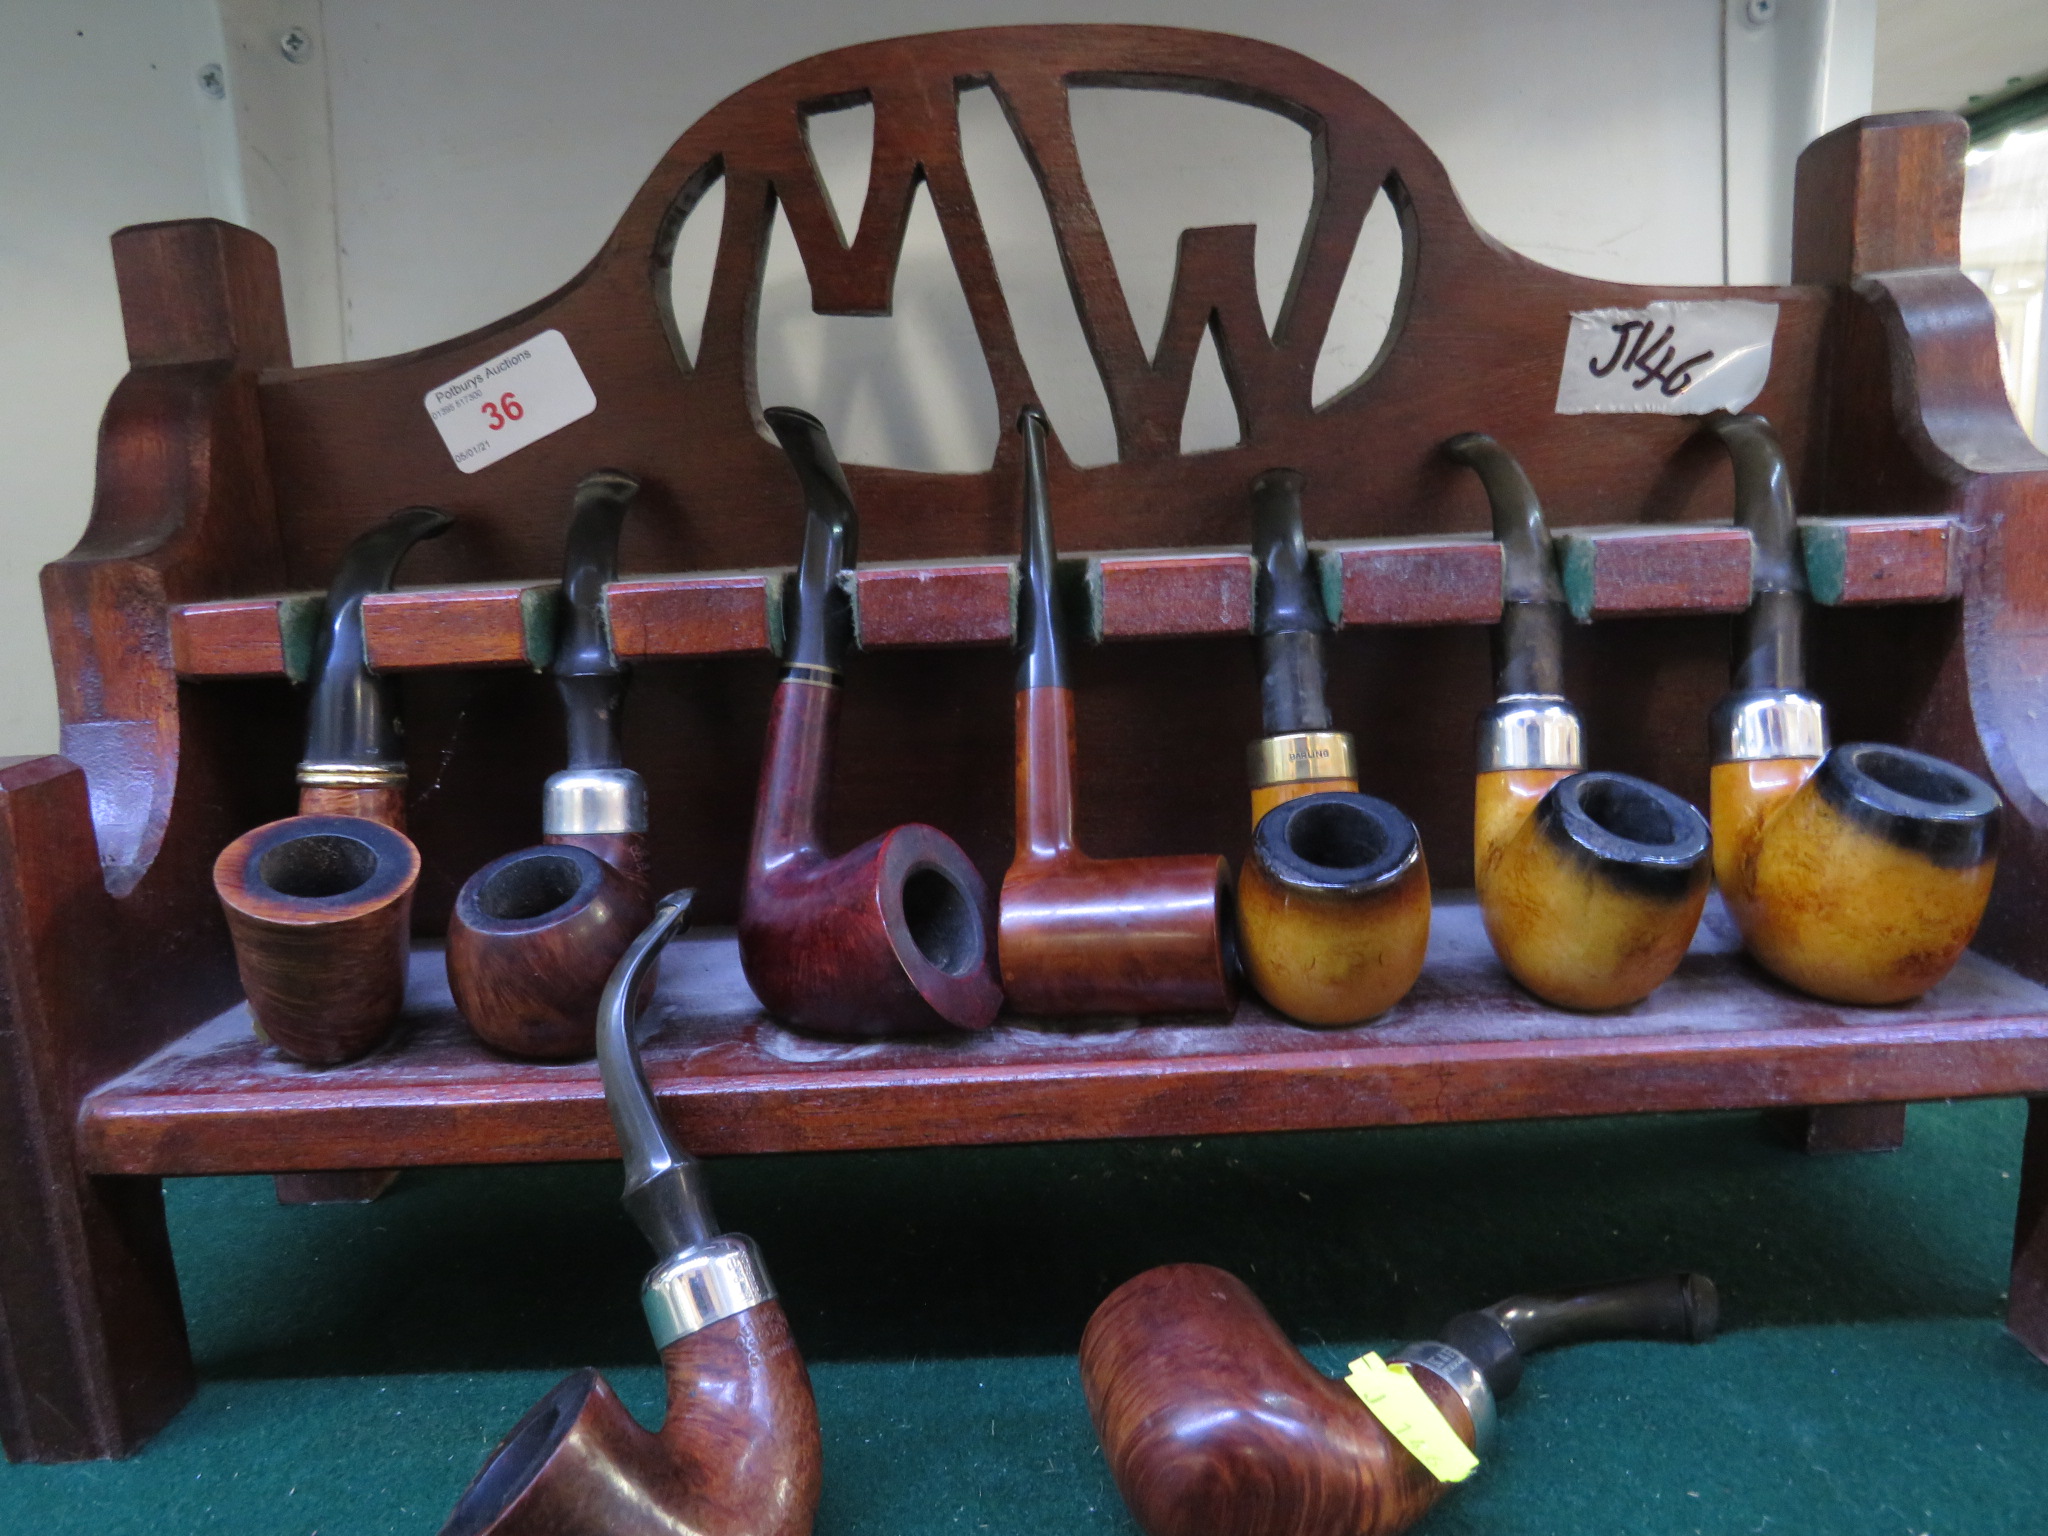 Nine vintage tobacco pipes including K & P, Torino, and a wooden pipe rack carved with initials